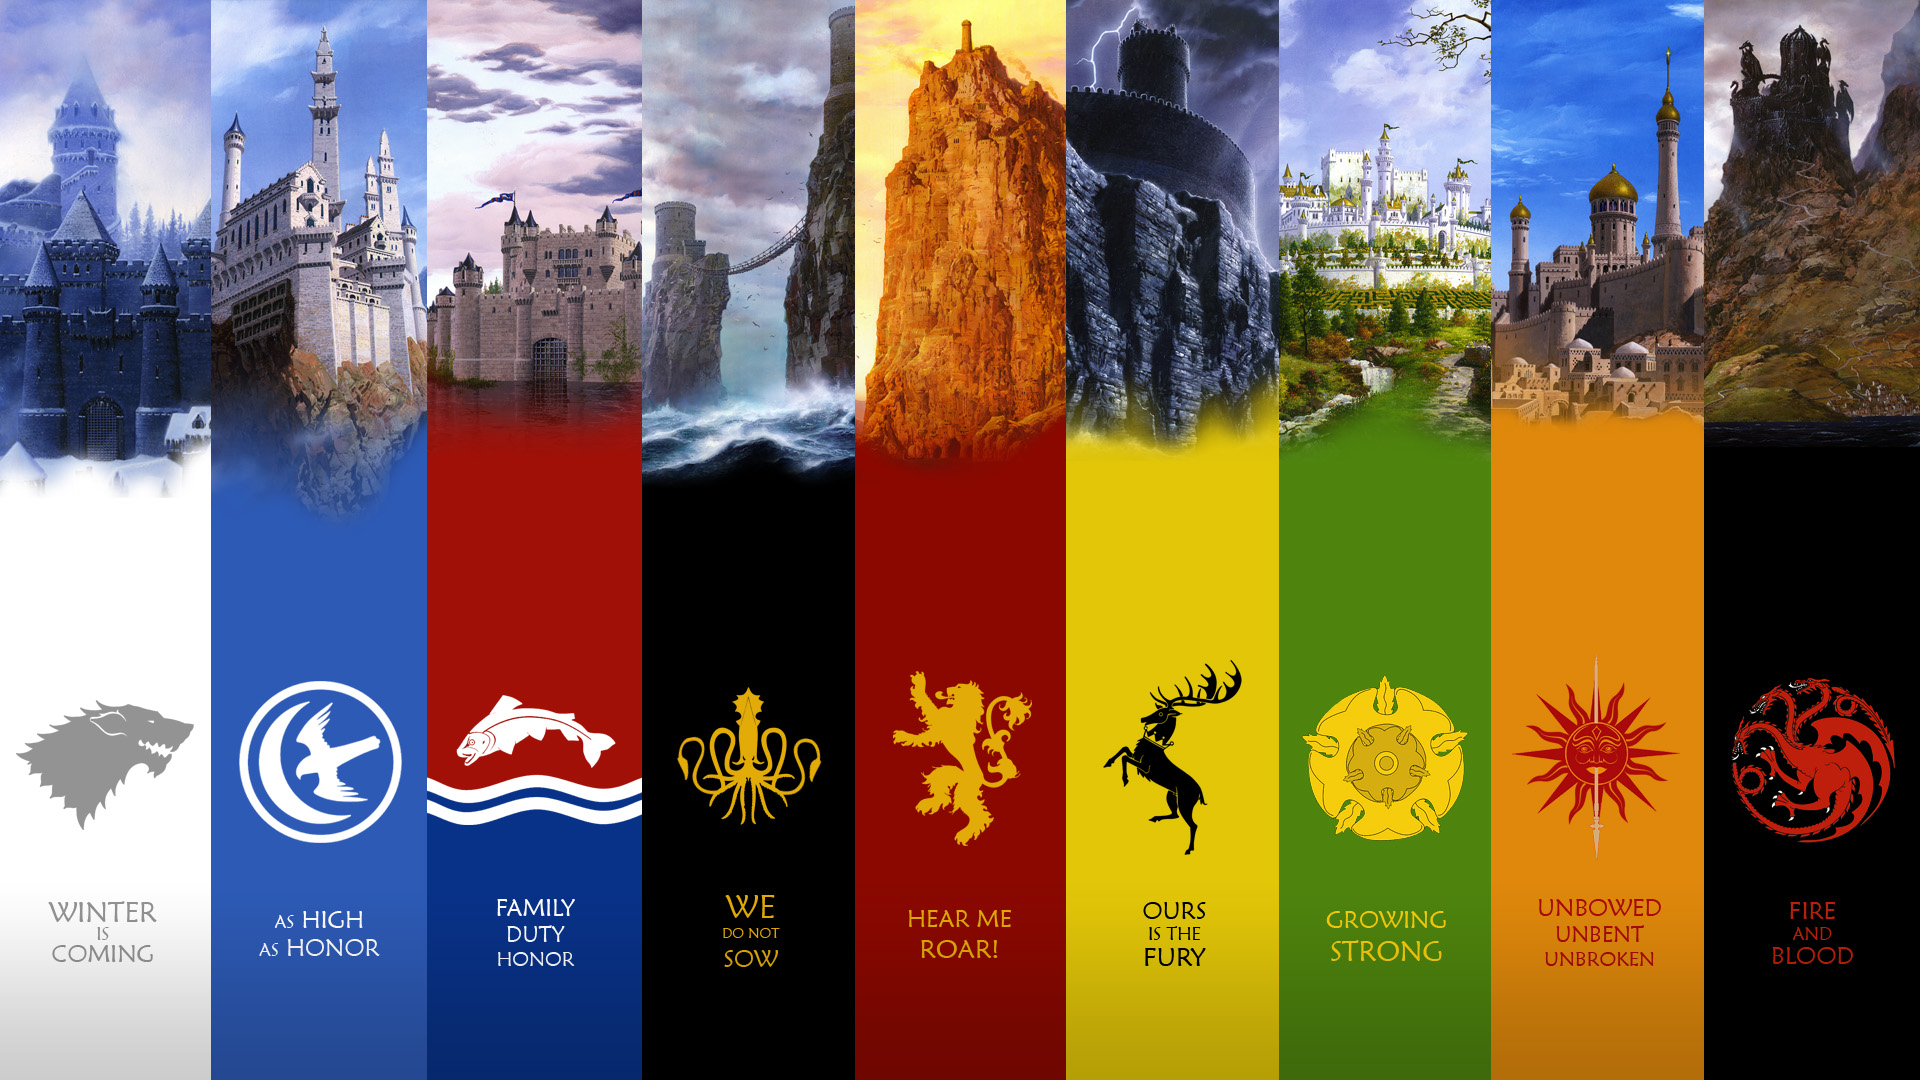 HD A Song Of Ice And Fire Wallpaper Photos